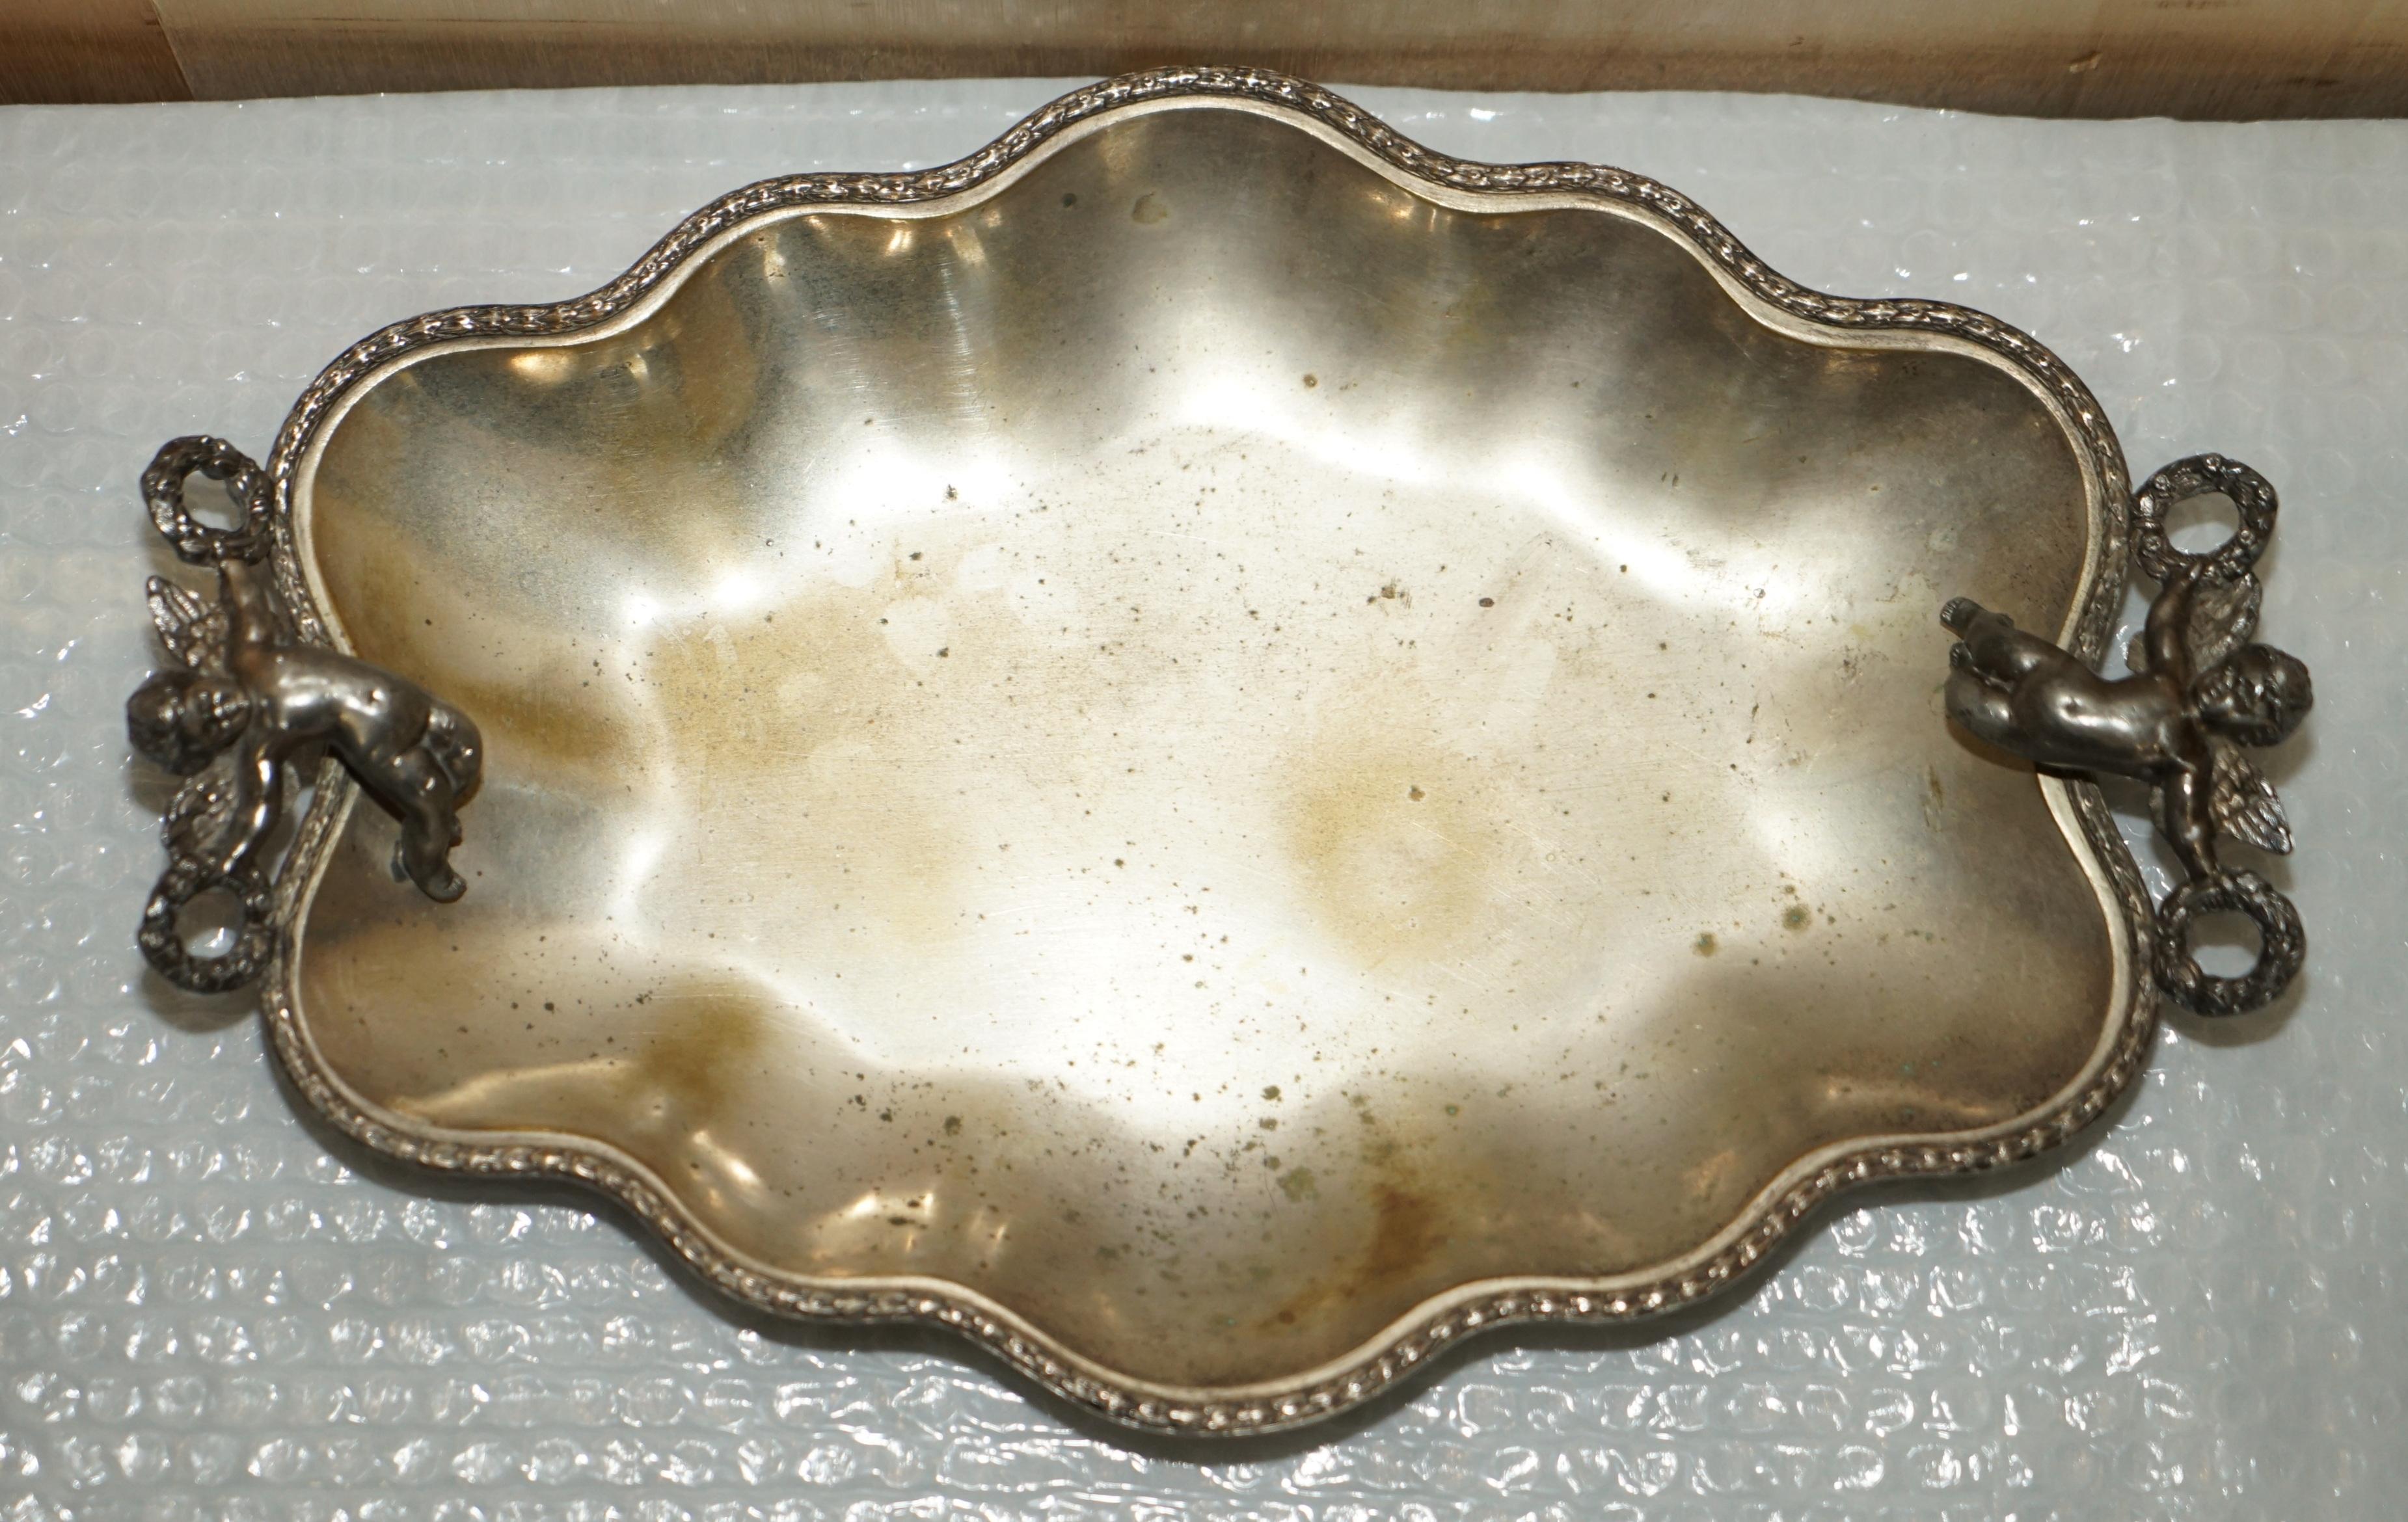 19th Century Lovely Antique Original Worn Finish Silver Plated Cherub Handle Serving Tray For Sale